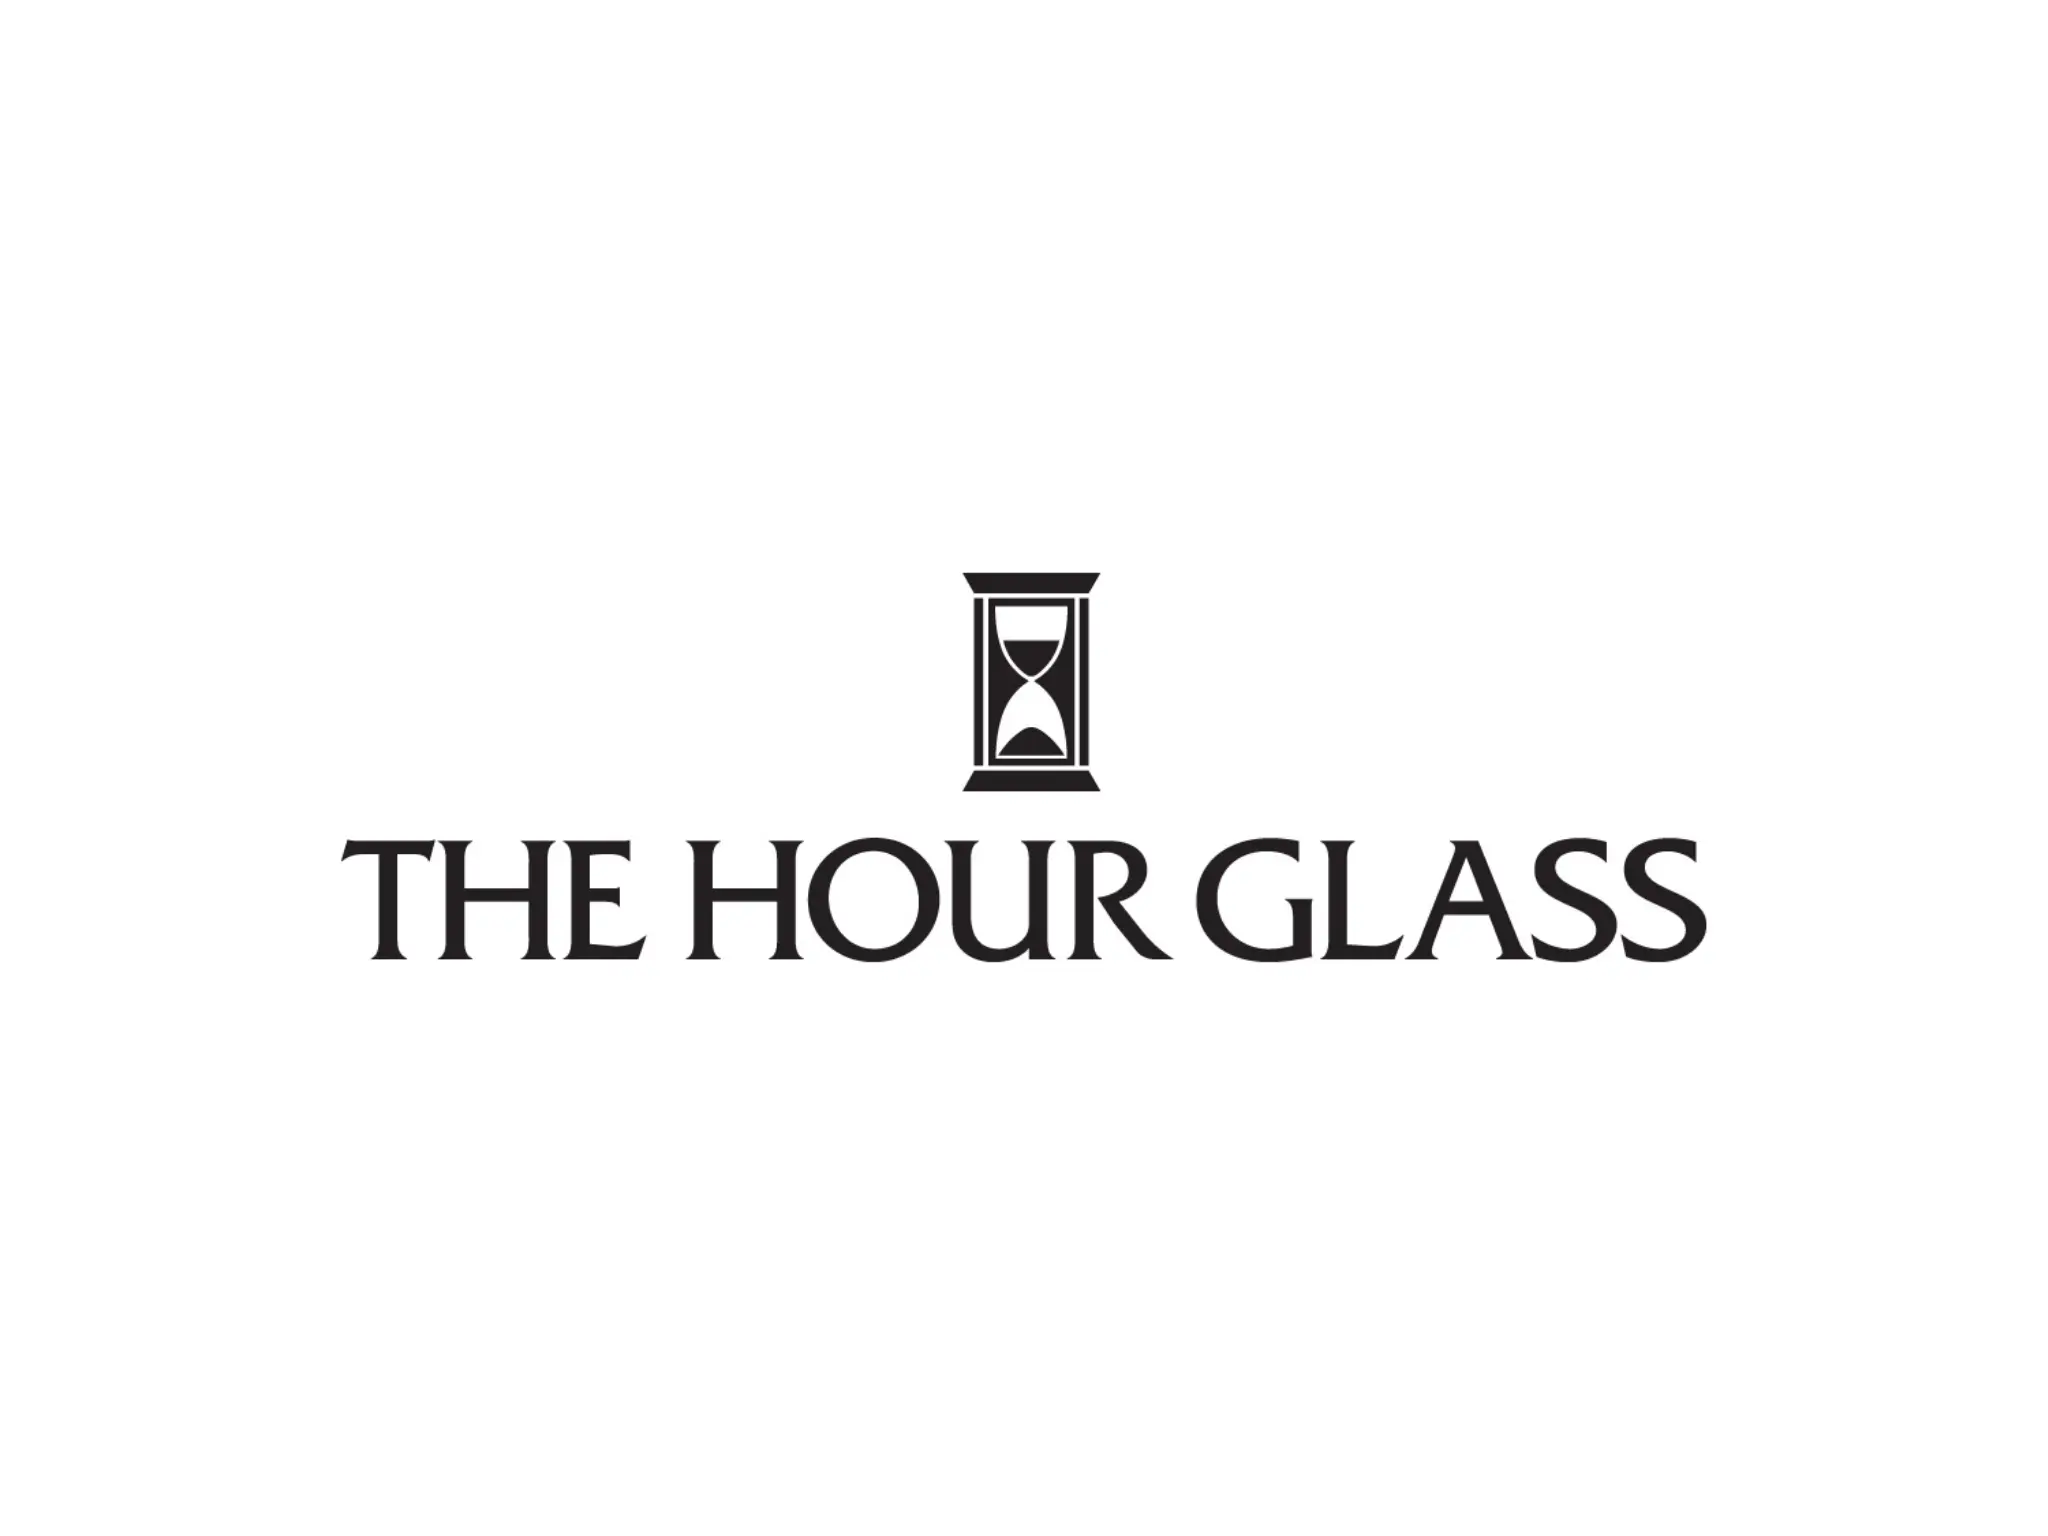 THE HOUR GLASS